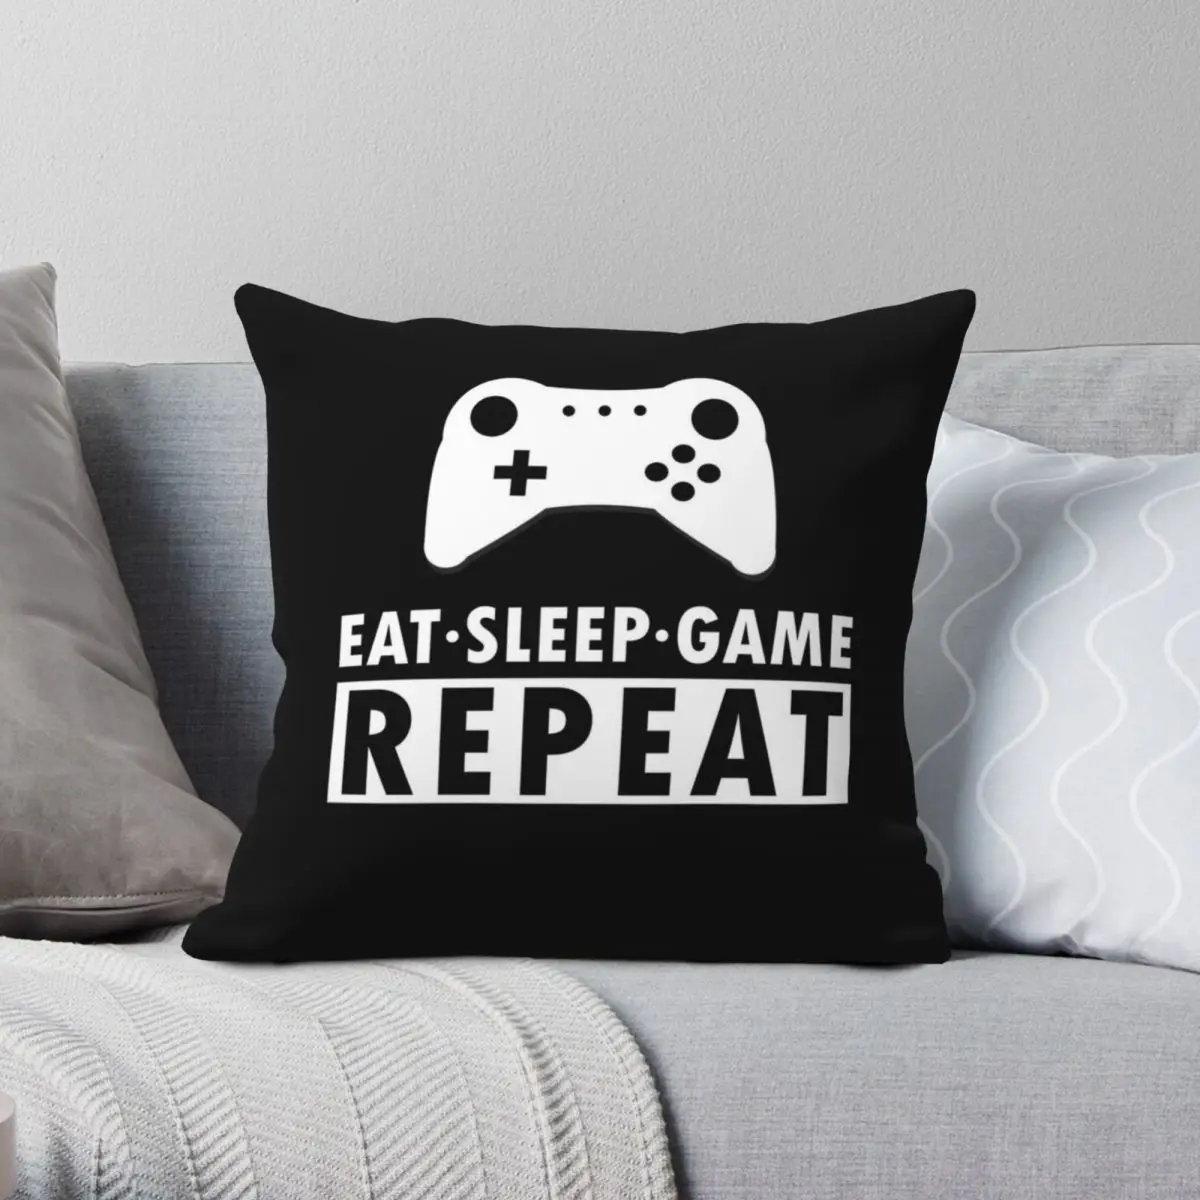 

Eat Sleep Game Repeat Square Pillowcase Polyester Linen Velvet Creative Zip Decorative Throw Pillow Case Bed Cushion Cover